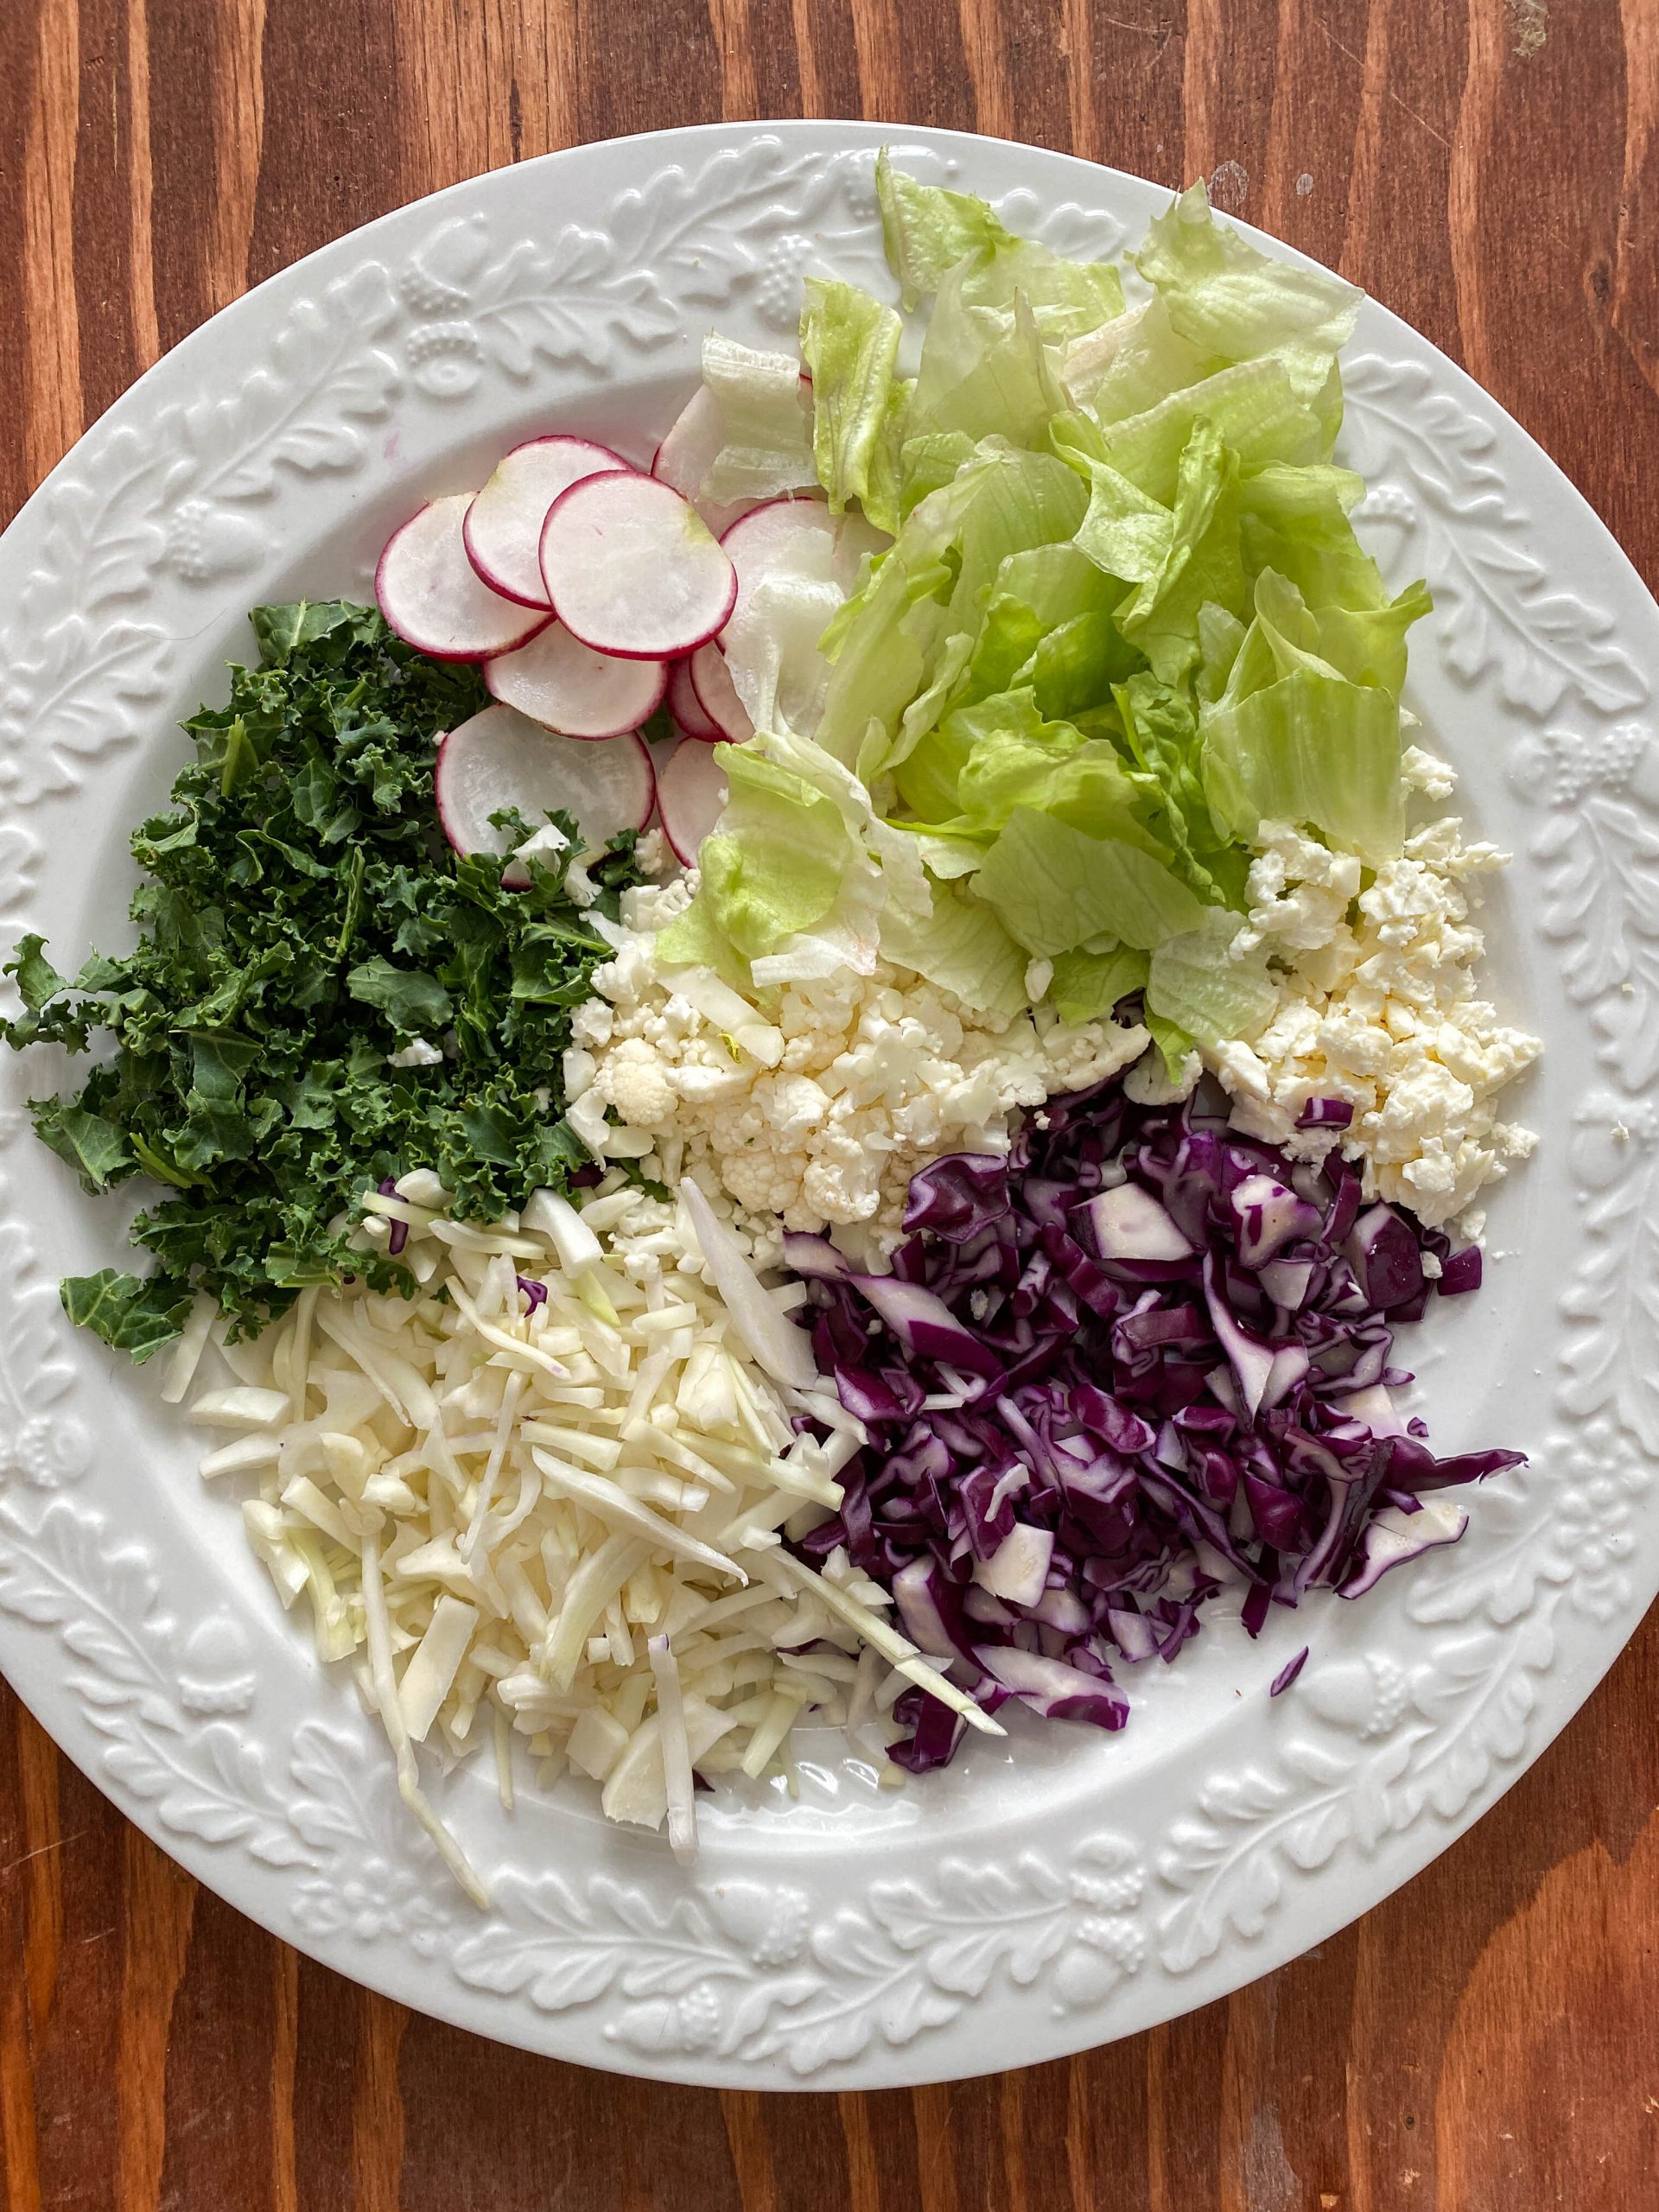 all of the ingredients for the salad shown in their ideal size